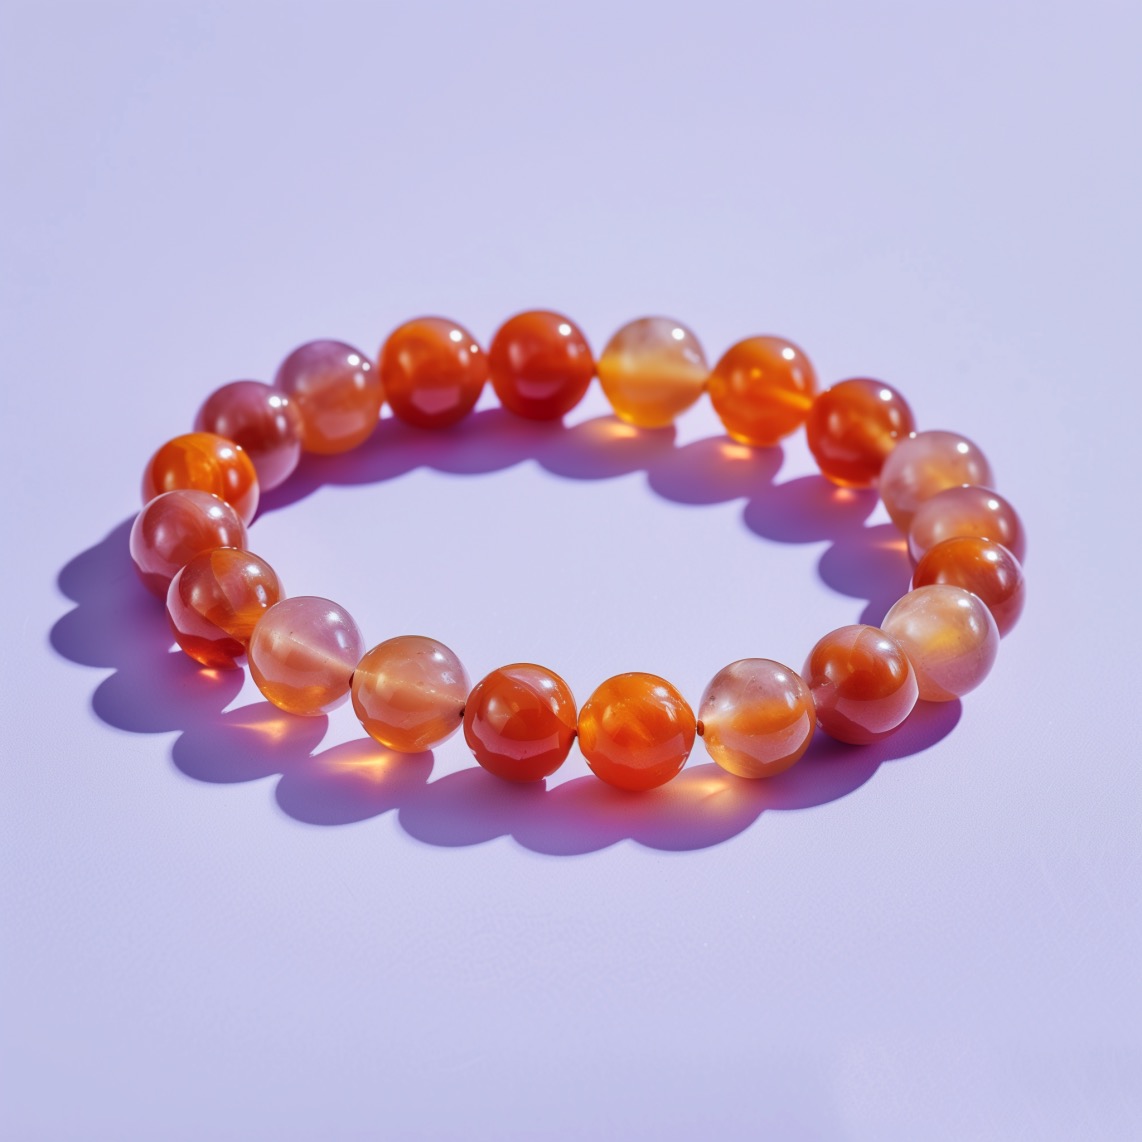 Carnelian bead bracelet on a purple background in bright sunlight, a versatile piece made with the Leo star sign birthstone.